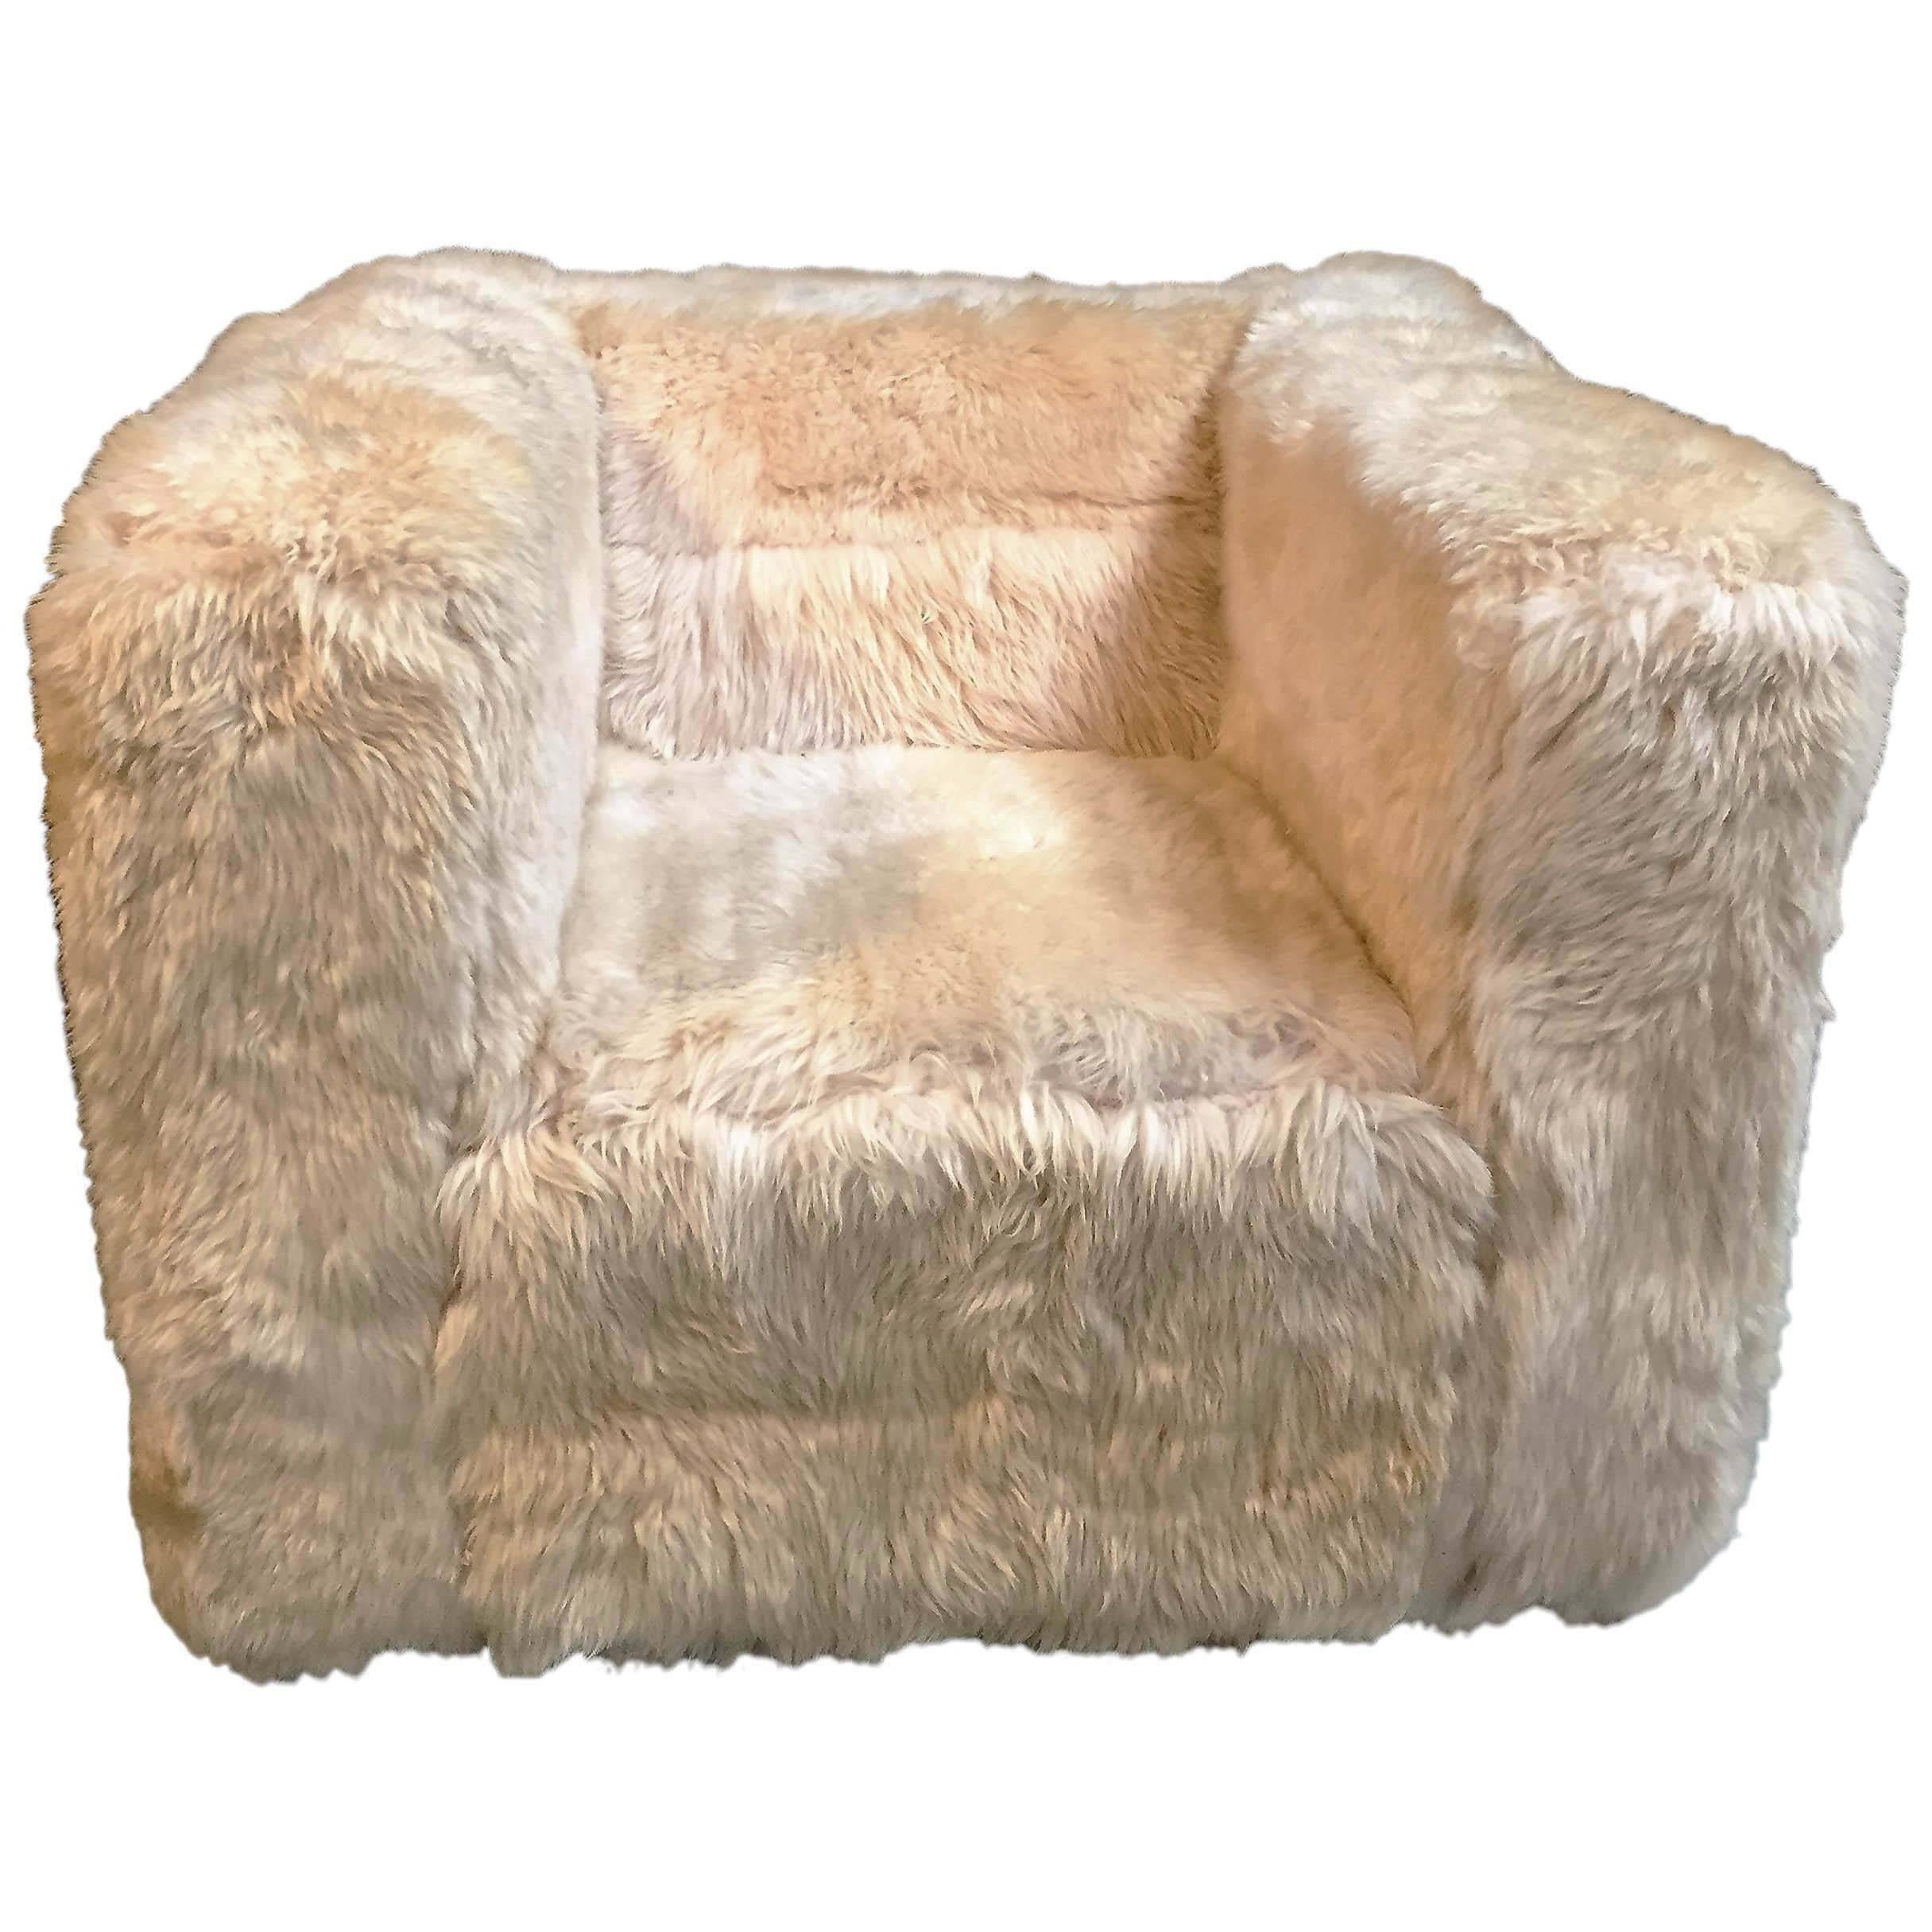 Cube chair upholstered with sheepskin